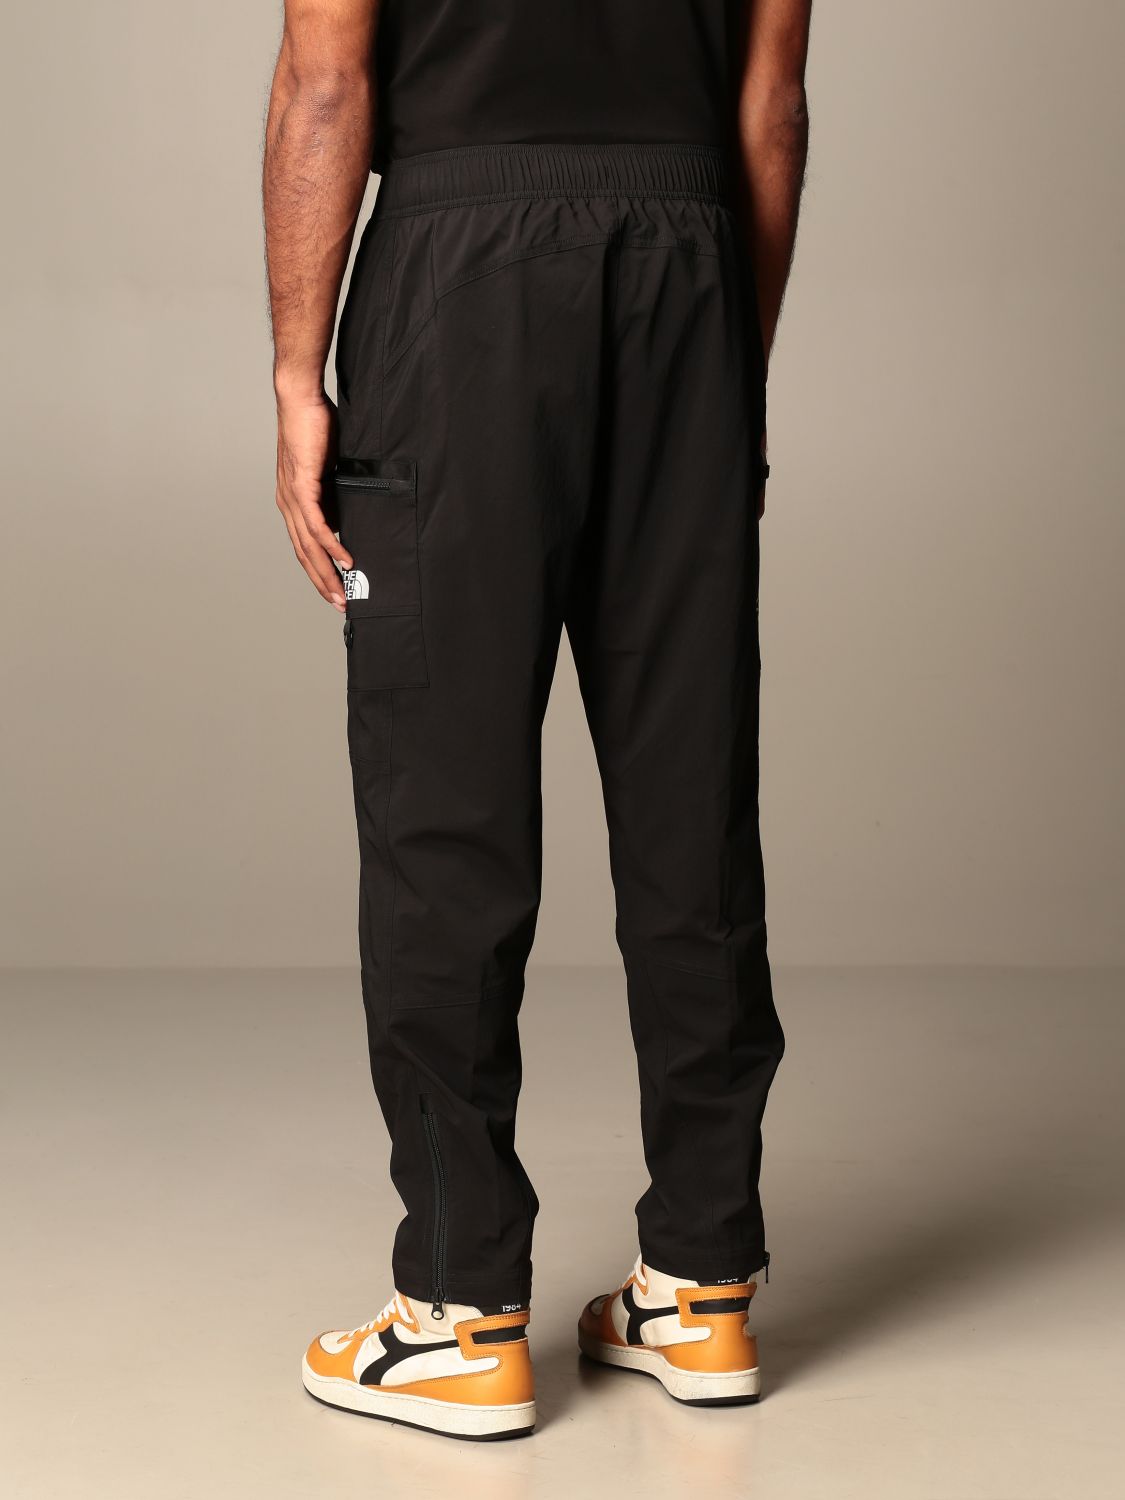 The North Face Outlet: jogging trousers in color block nylon | Pants ...